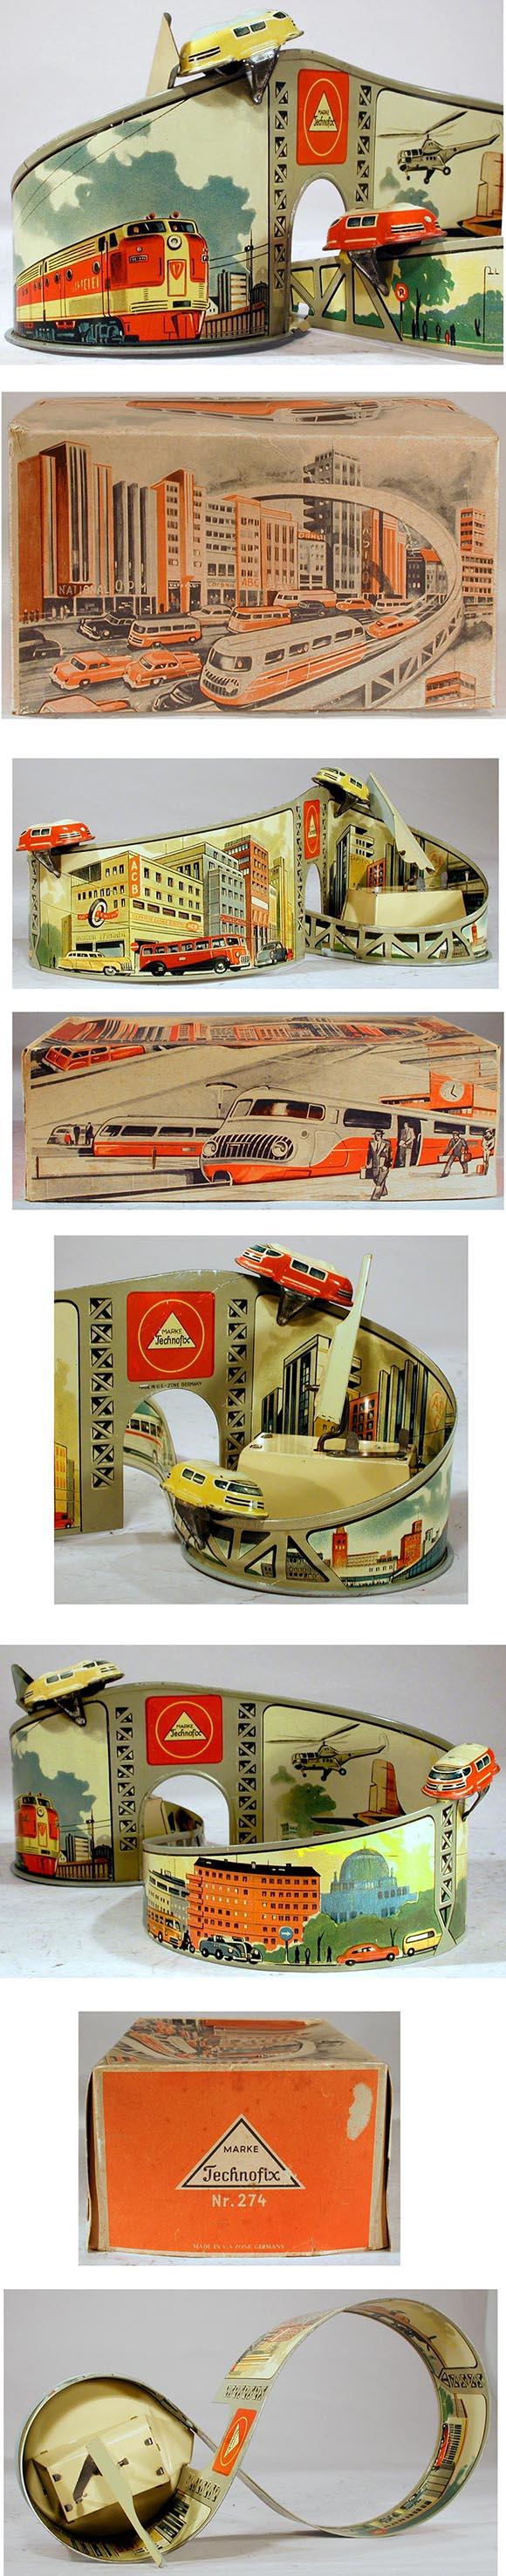 1954 Technofix, No.274 Monorail with Two Cars in Original Box